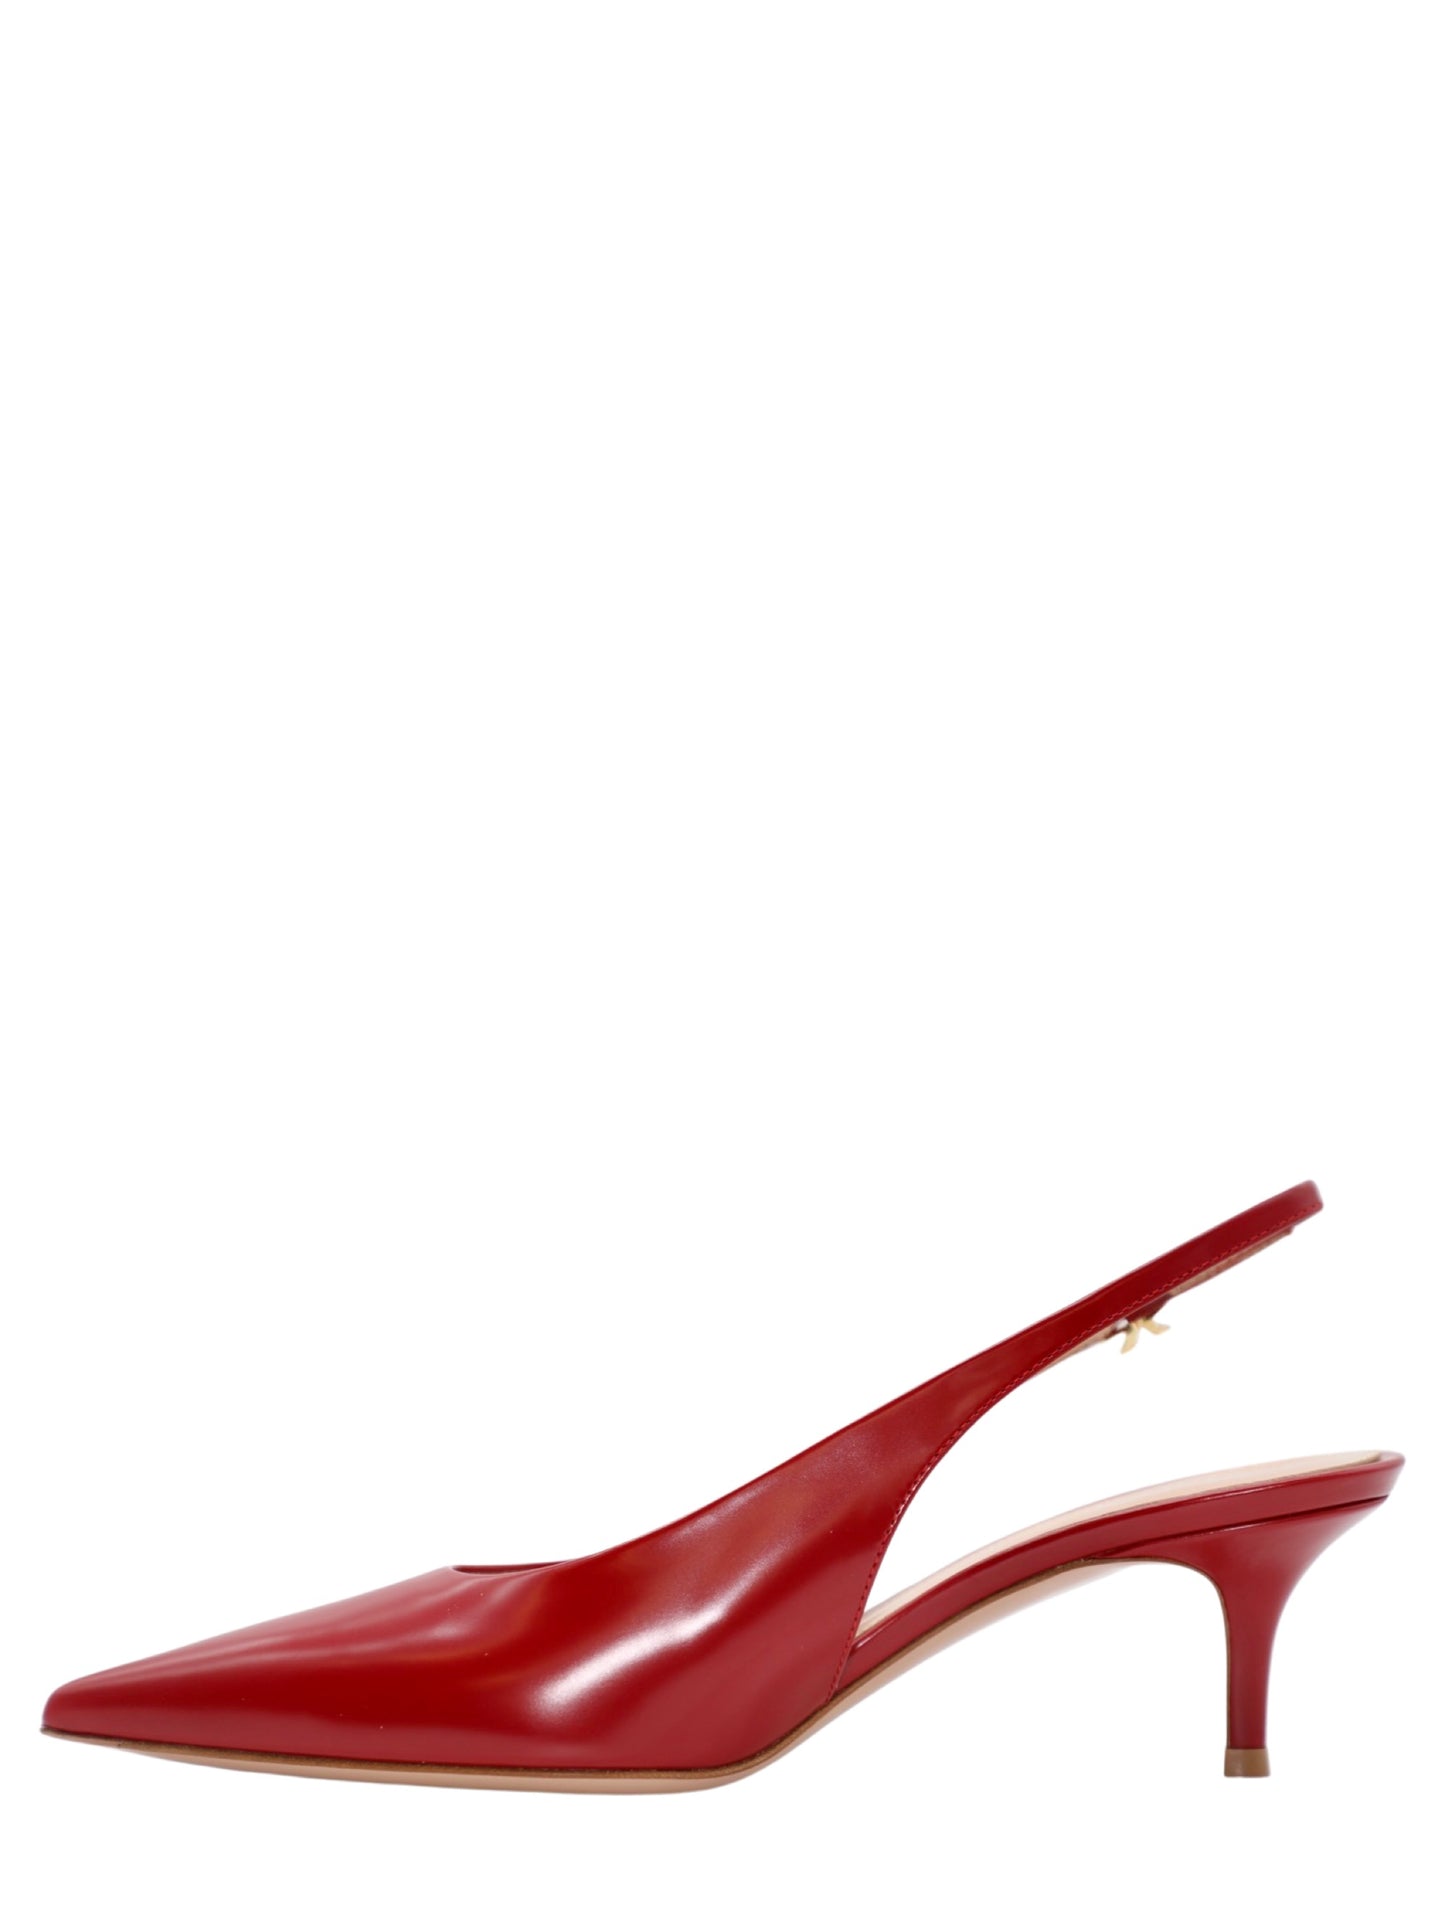 Gianvito Rossi Sling Back Pump in Rouge